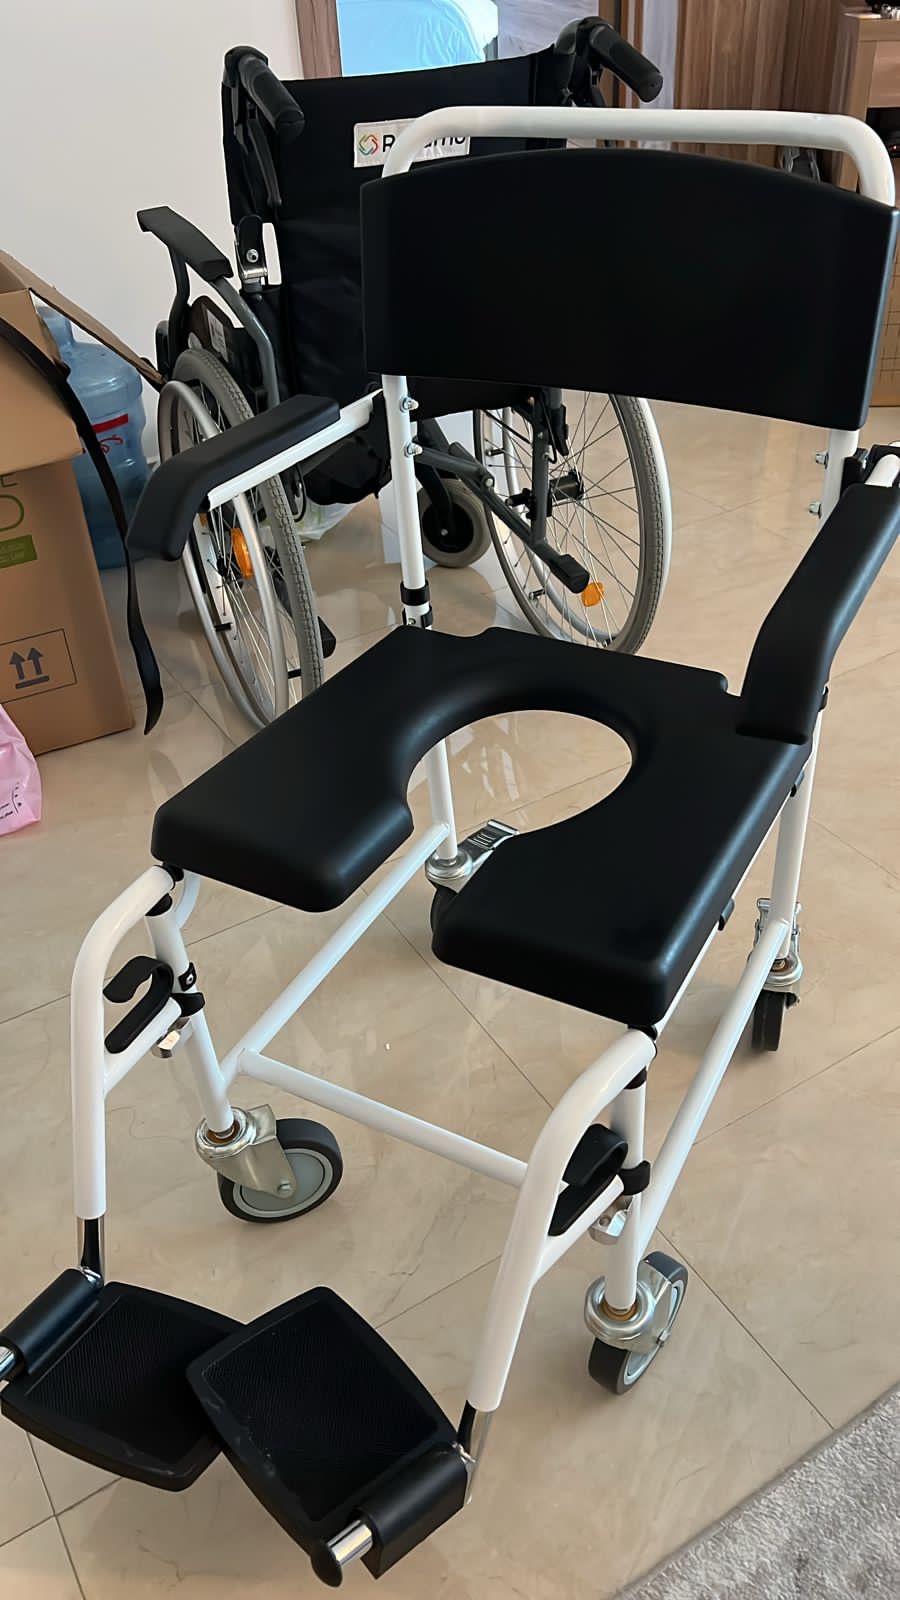 Rehamo Shower Commode chair with Flip Arm and Swing Away Footrest used